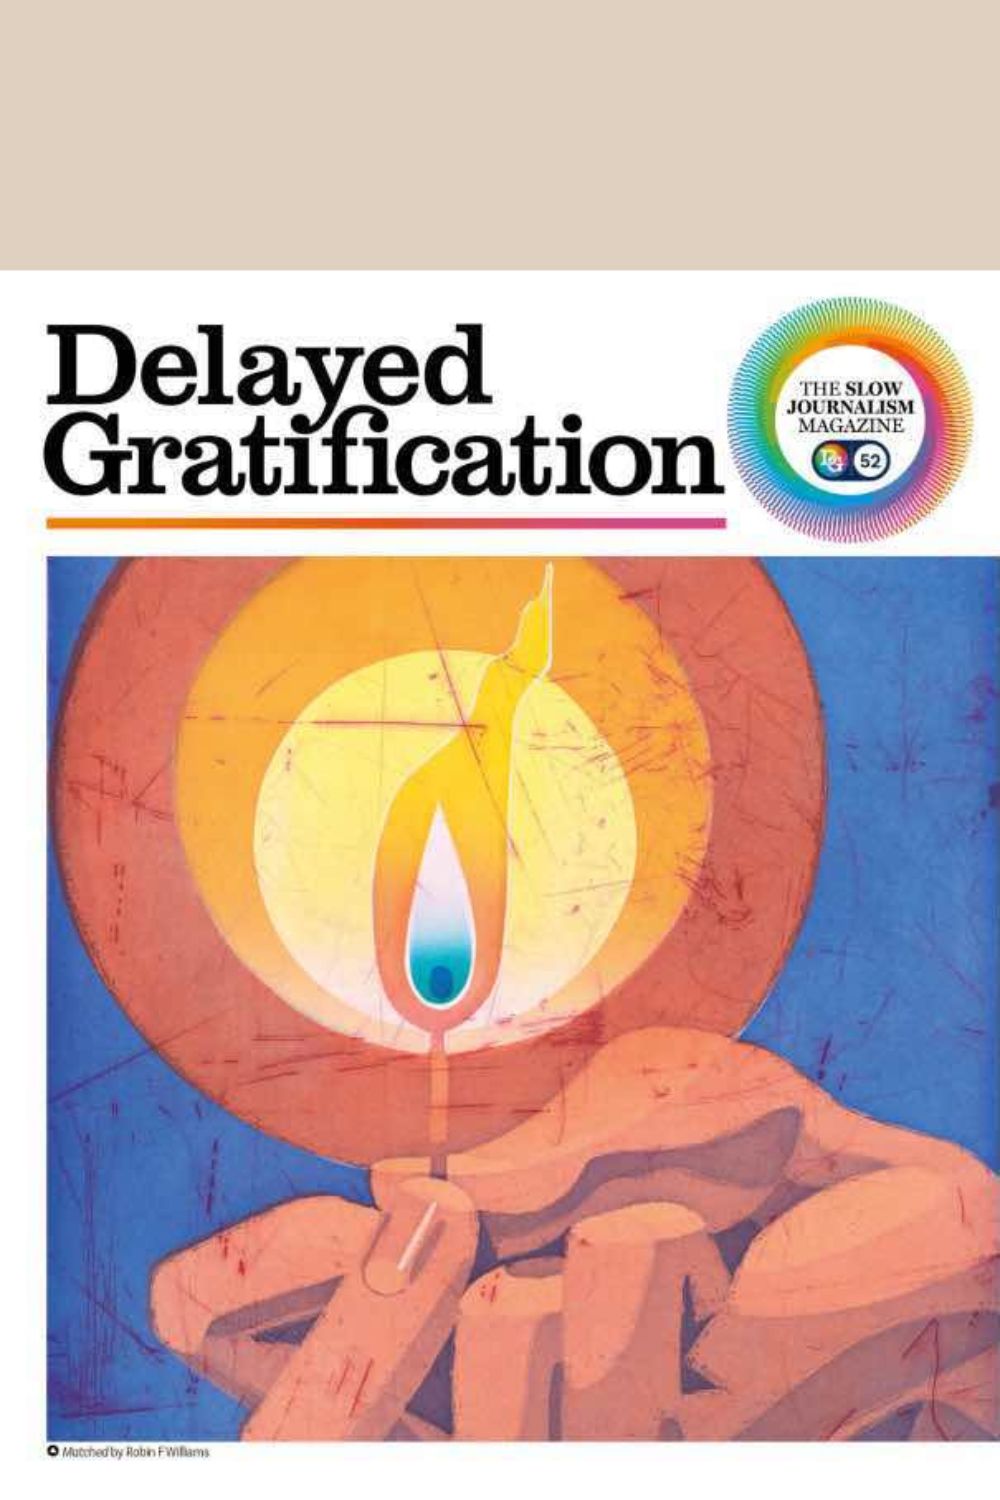 Delayed Gratification magazine cover issue 52